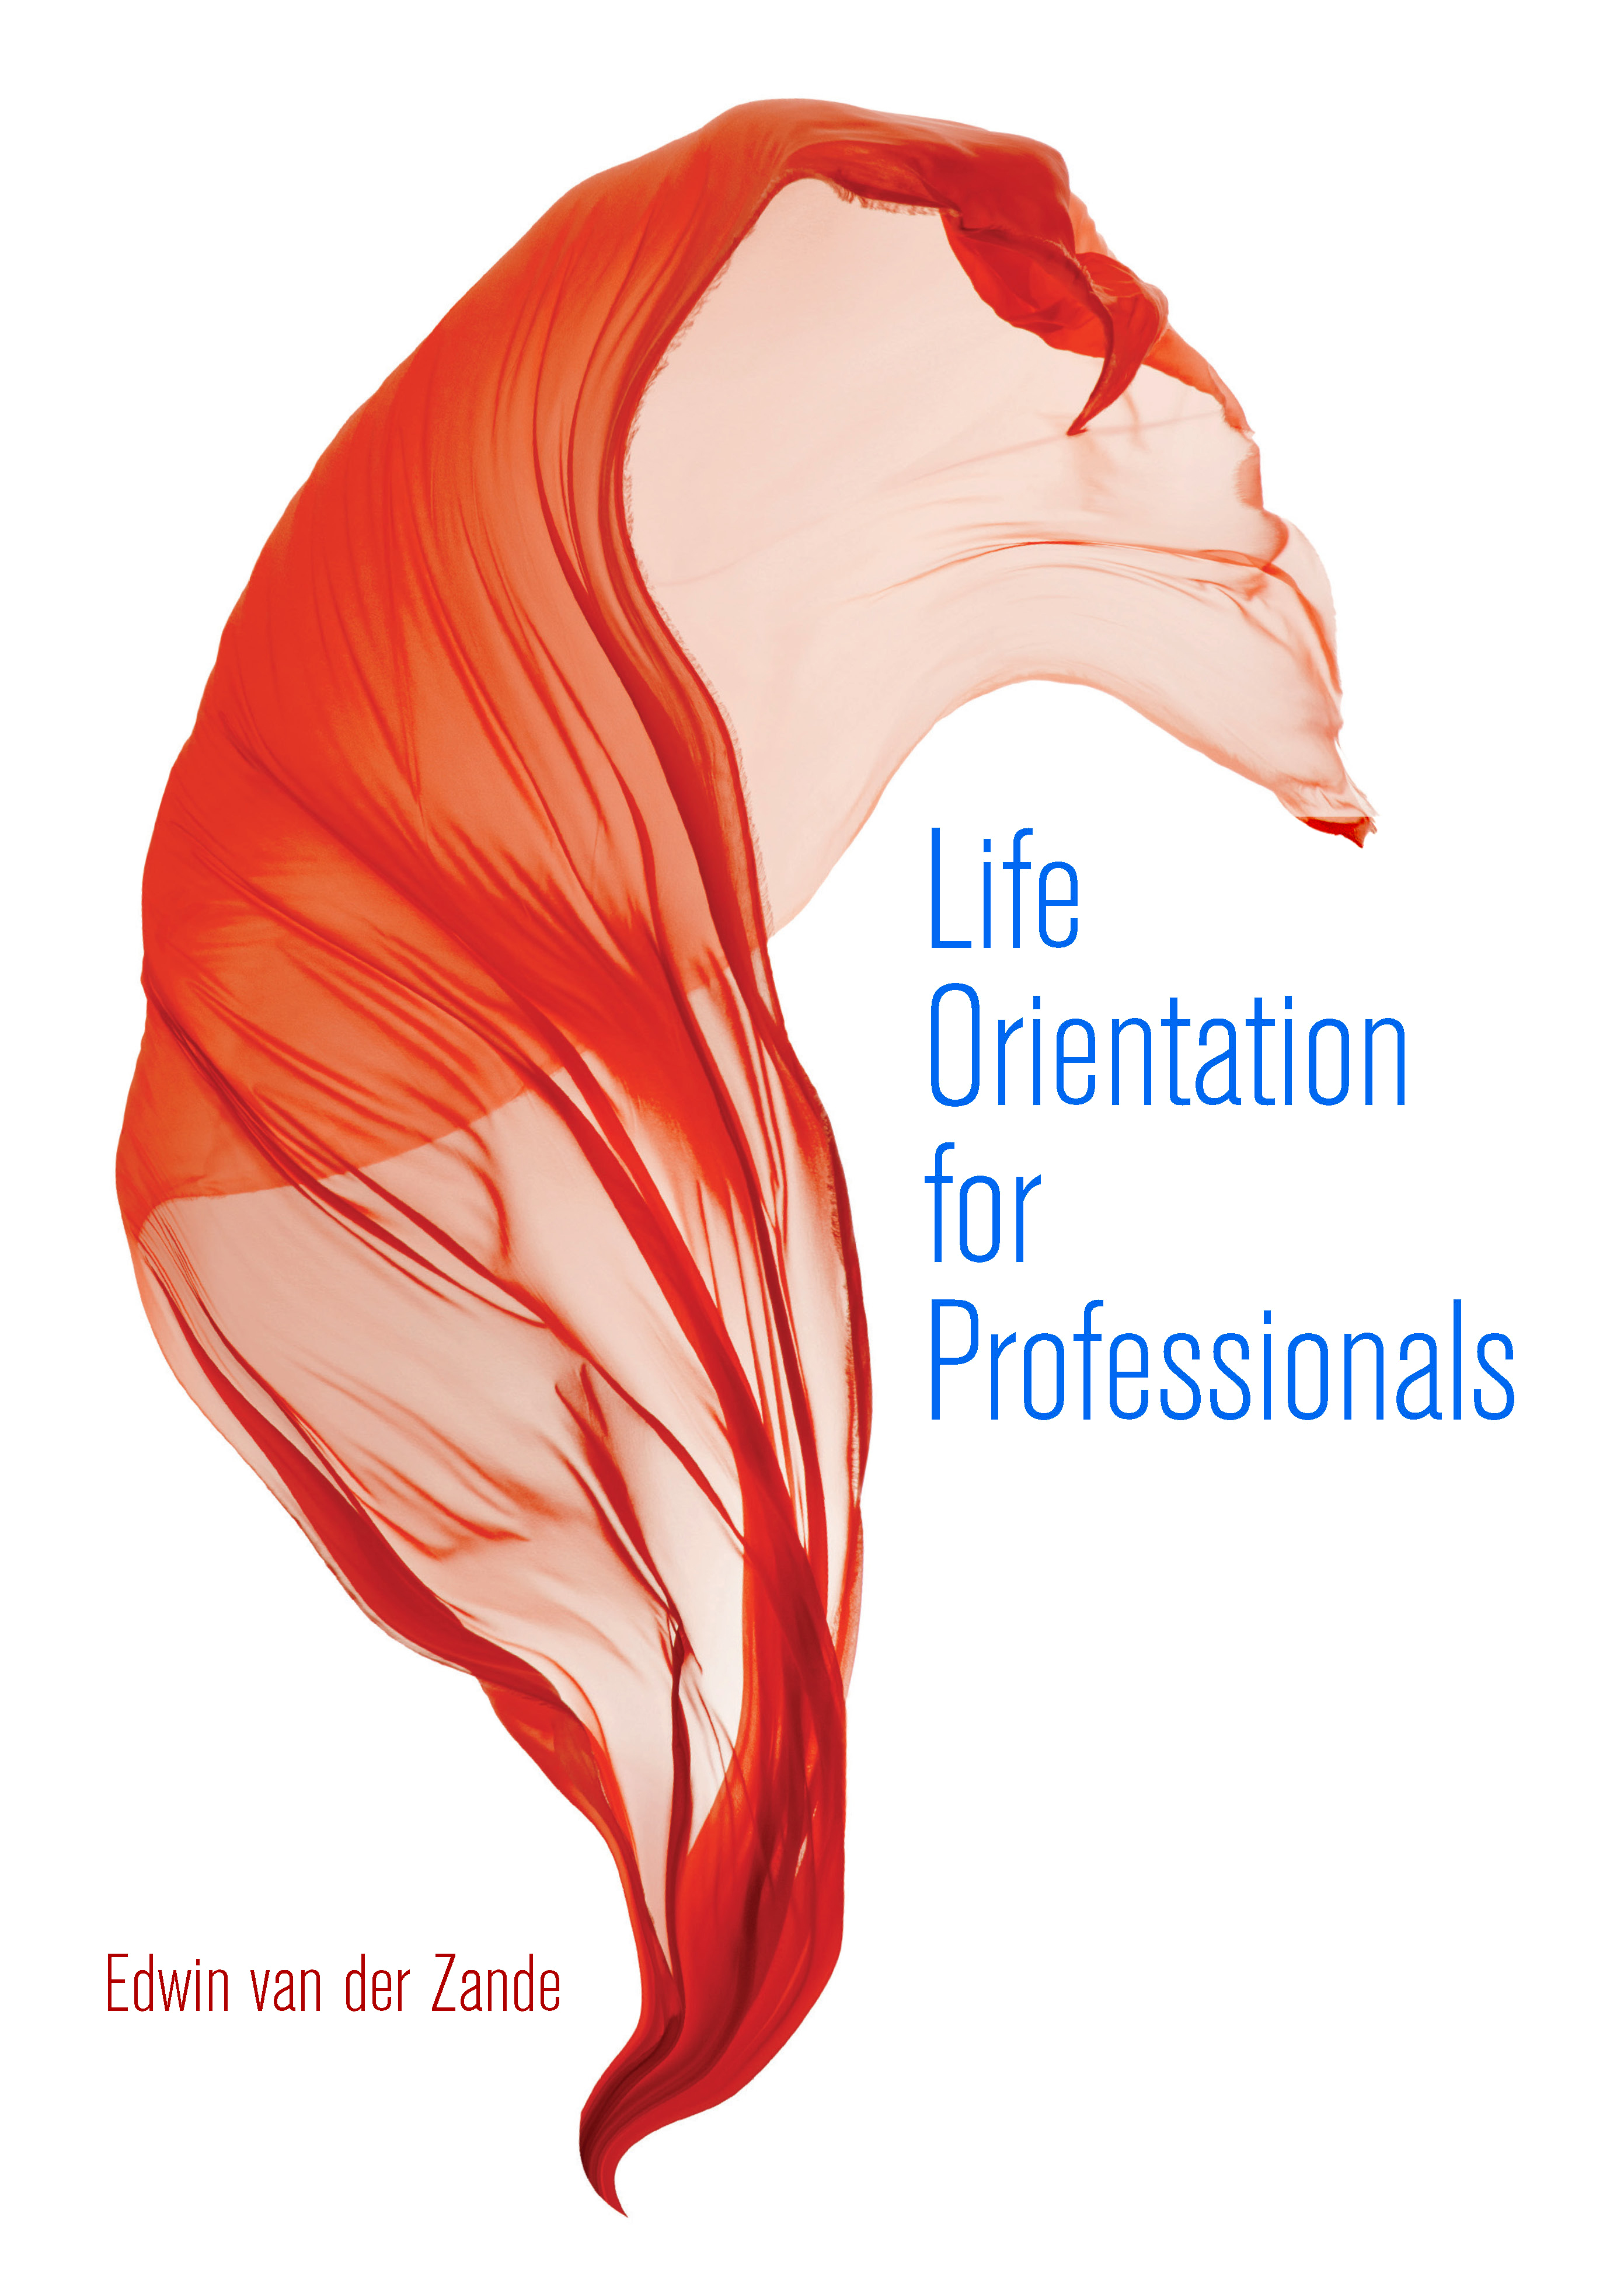 Life Orientation for Professionals